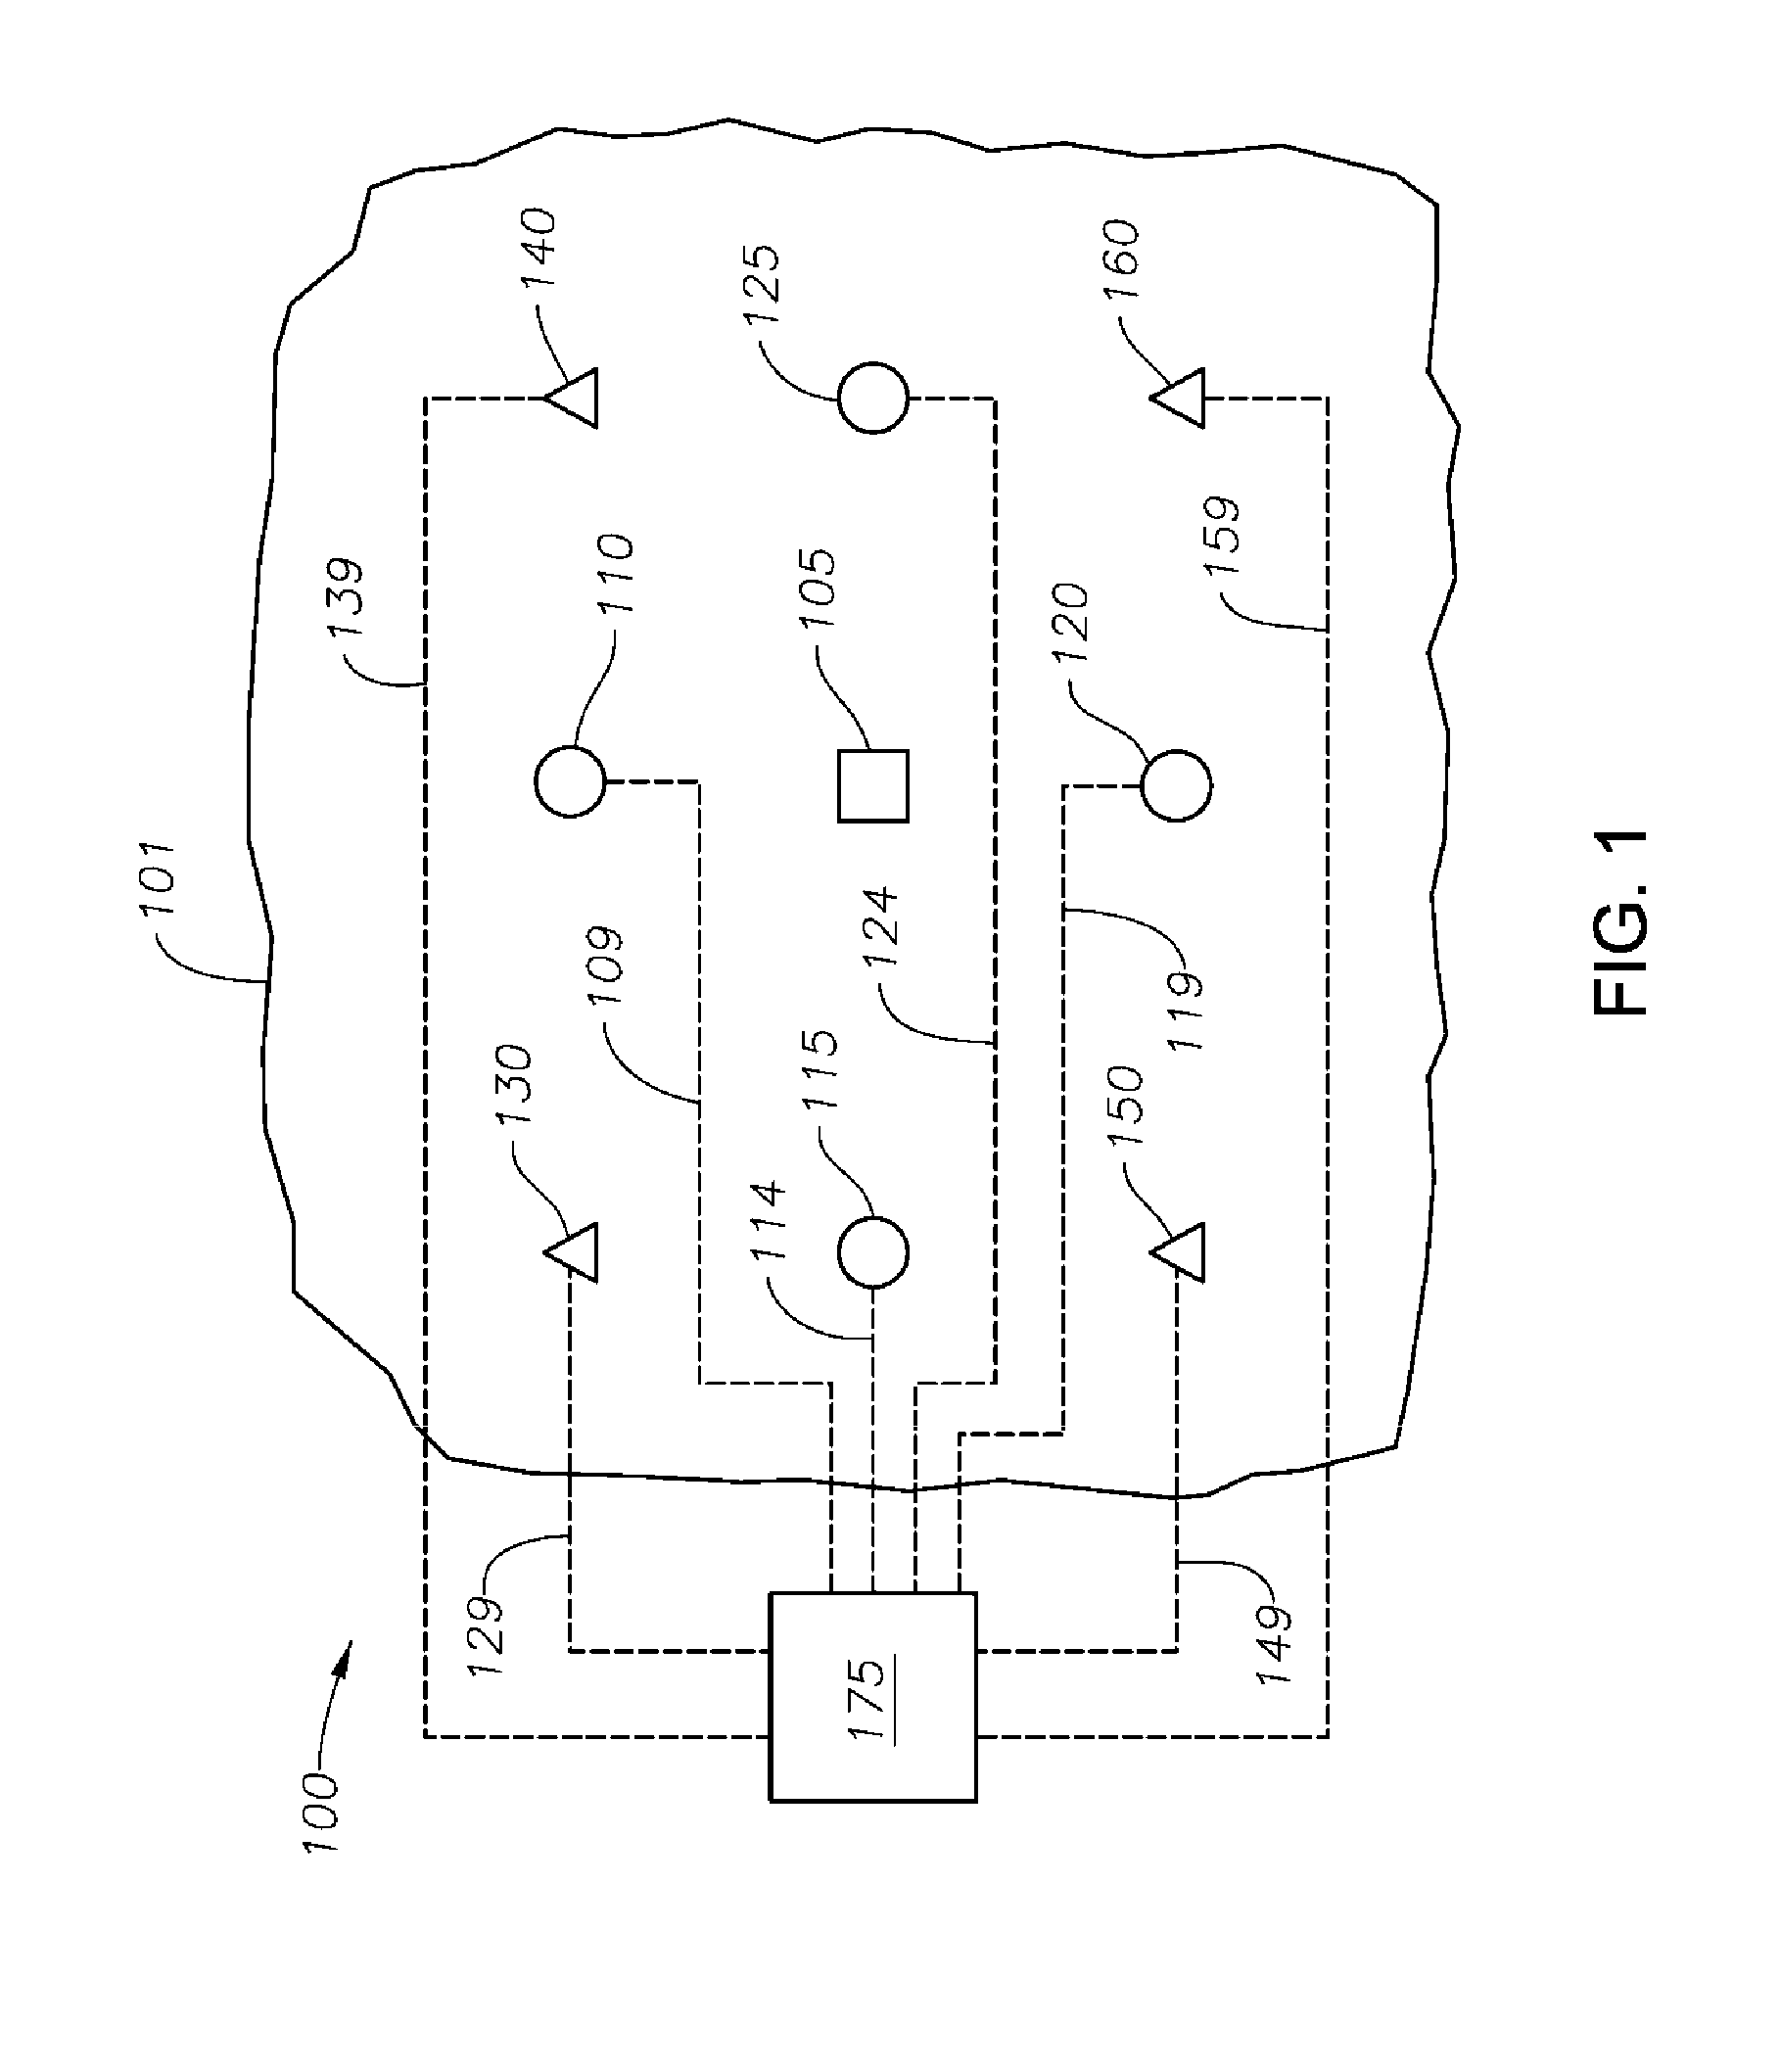 Systems and methods for reducing an overpressure caused by a vapor cloud explosion